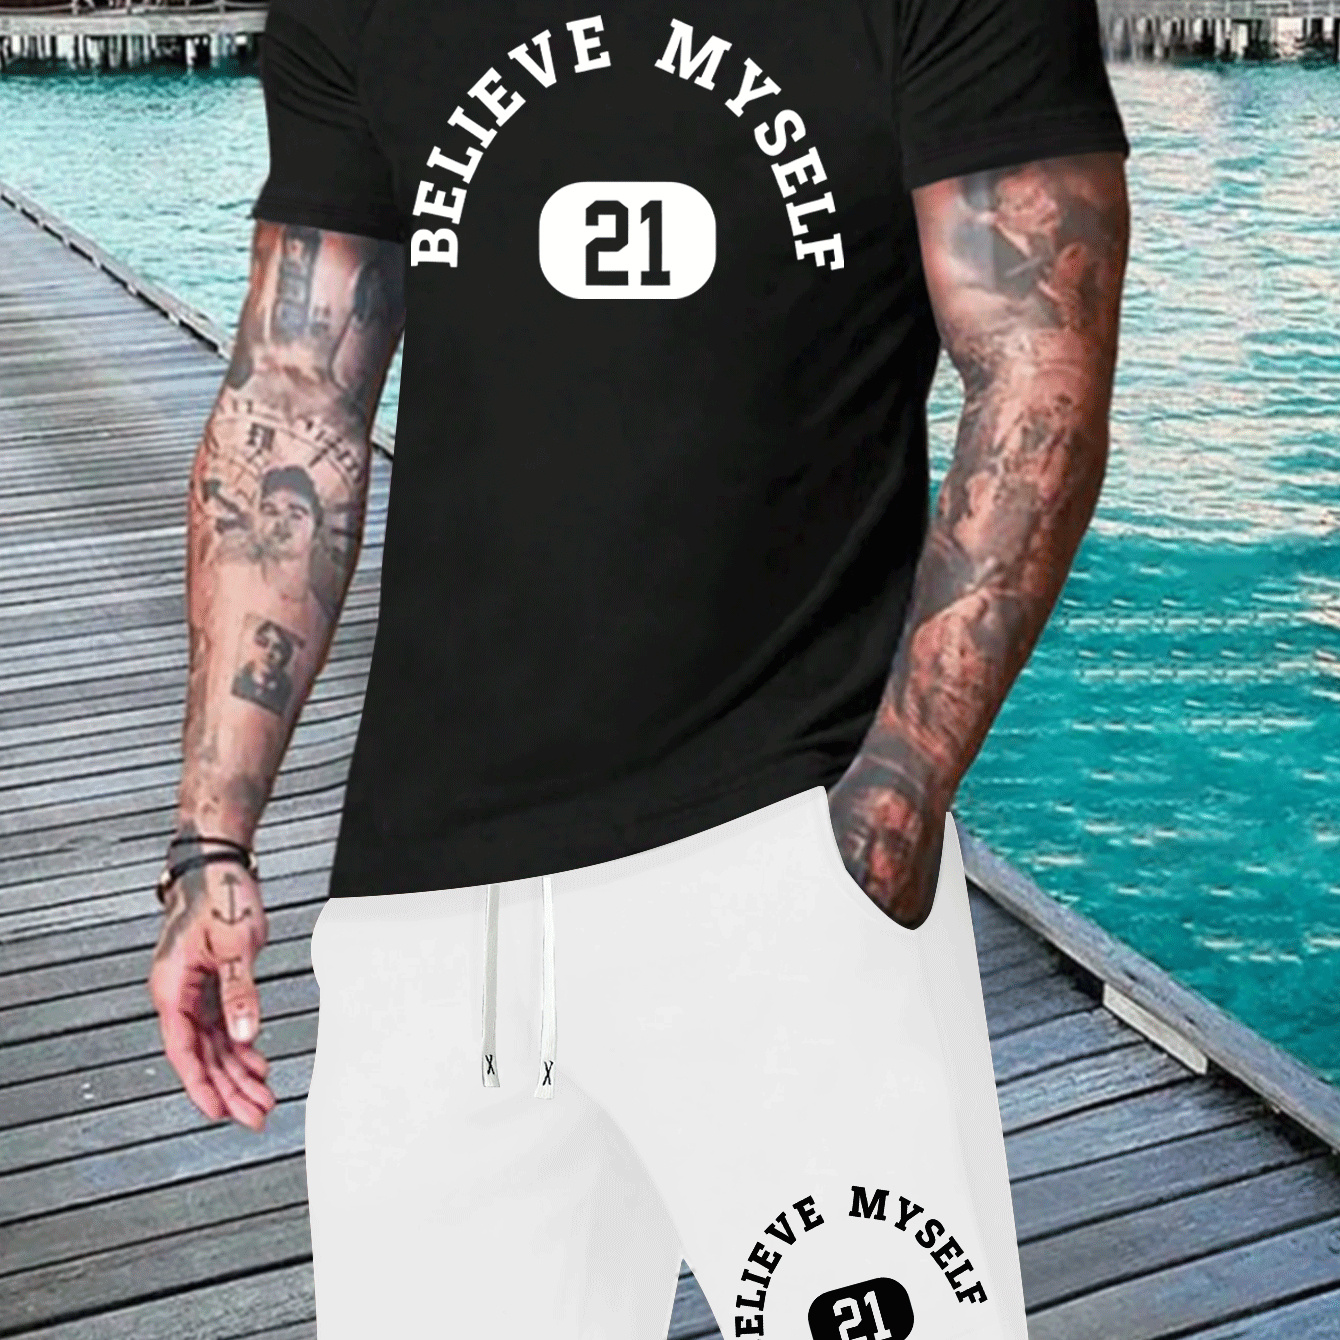 

Believe Myself 21 Letter Print Men's 2 Pieces Outfits, Crew Neck Short Sleeve T-shirt & Drawstring Shorts, Casual Comfy Versatile Set For Summer, Outdoor Sports